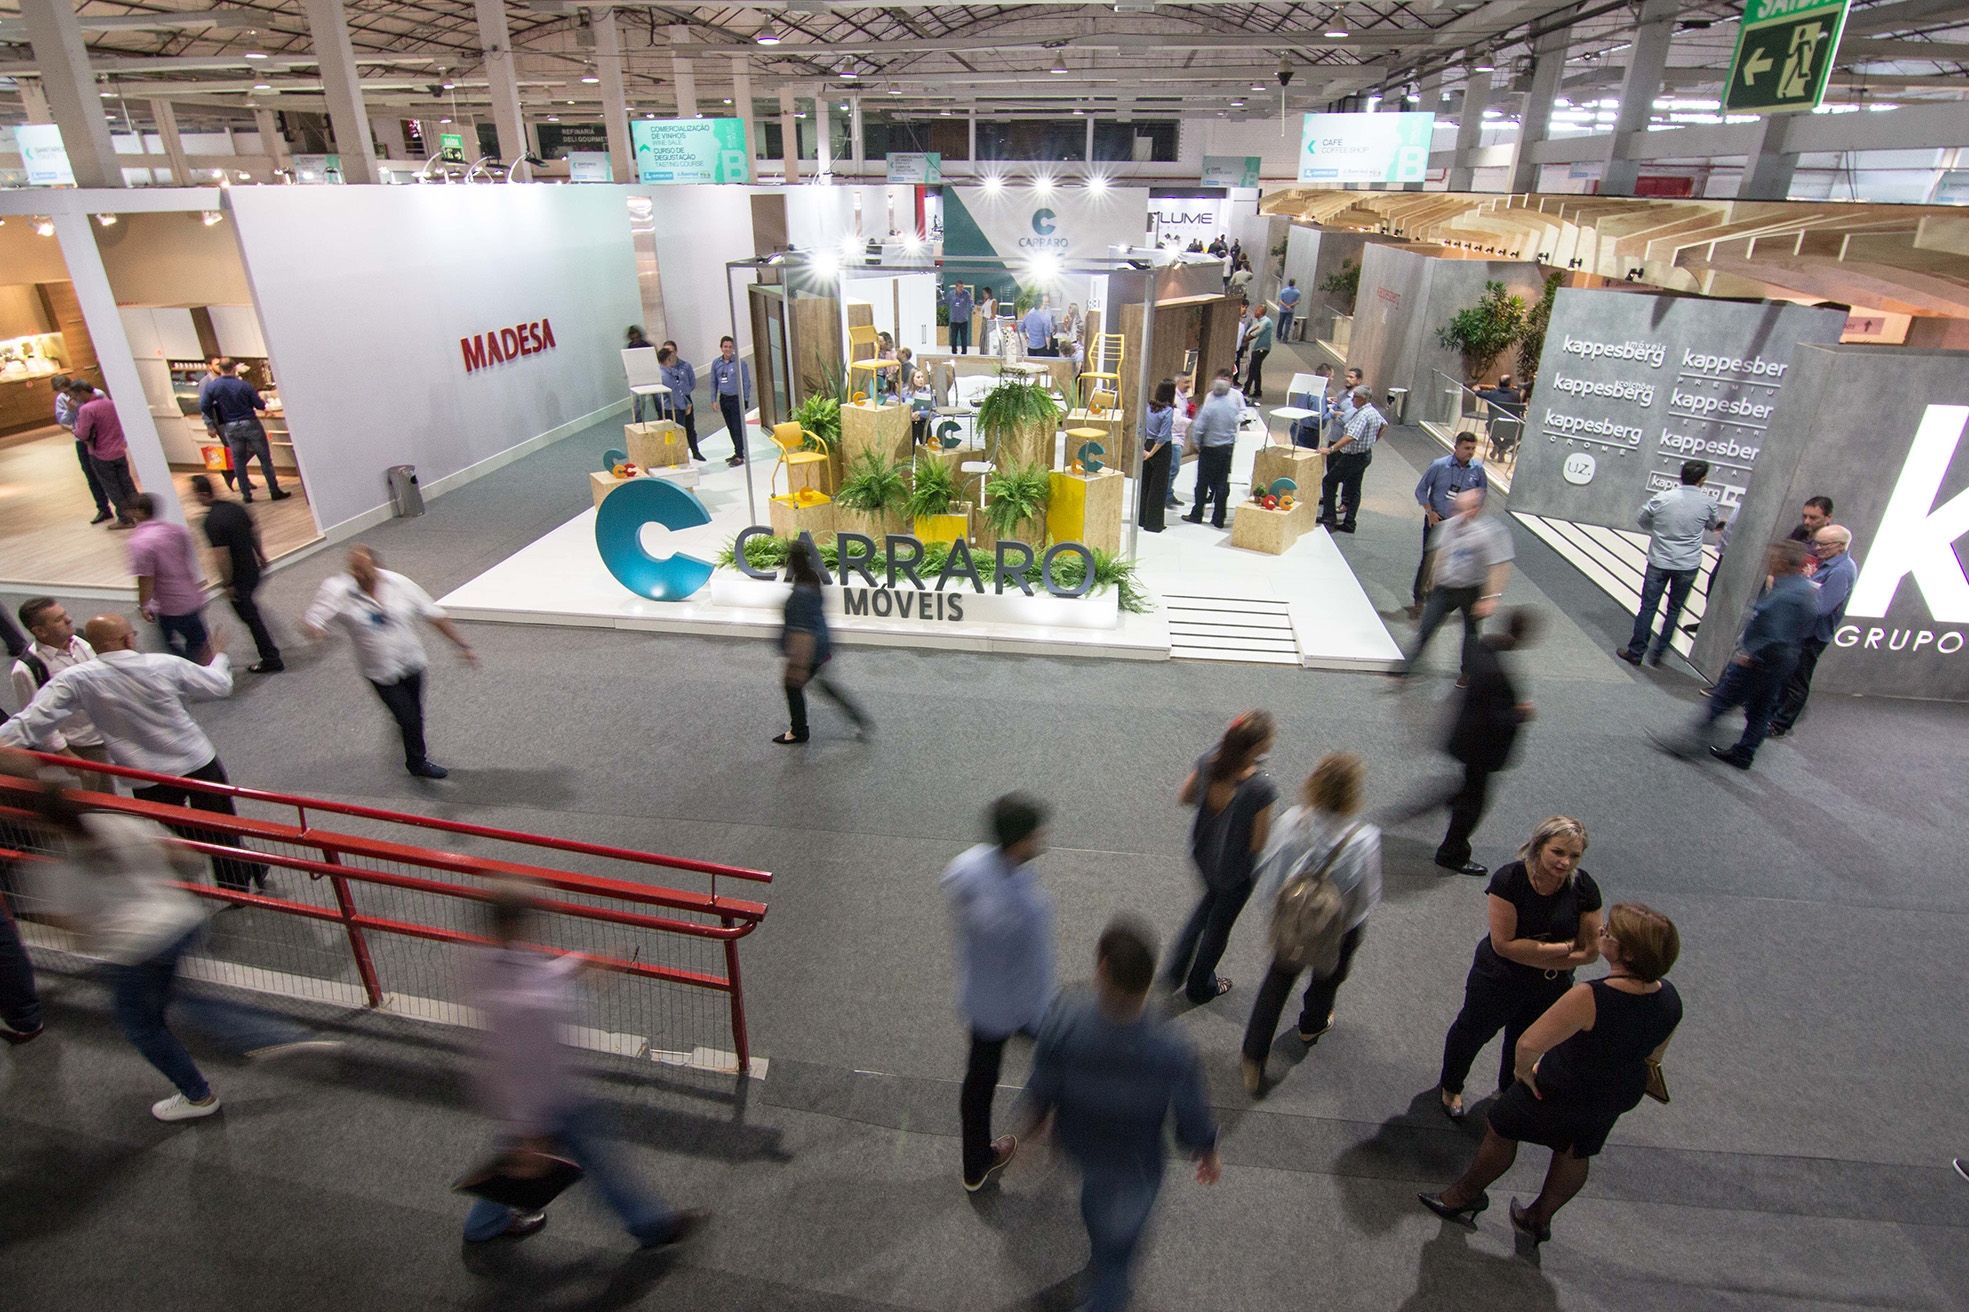 Movelsul Brasil has sold 80% of its exhibit spaces